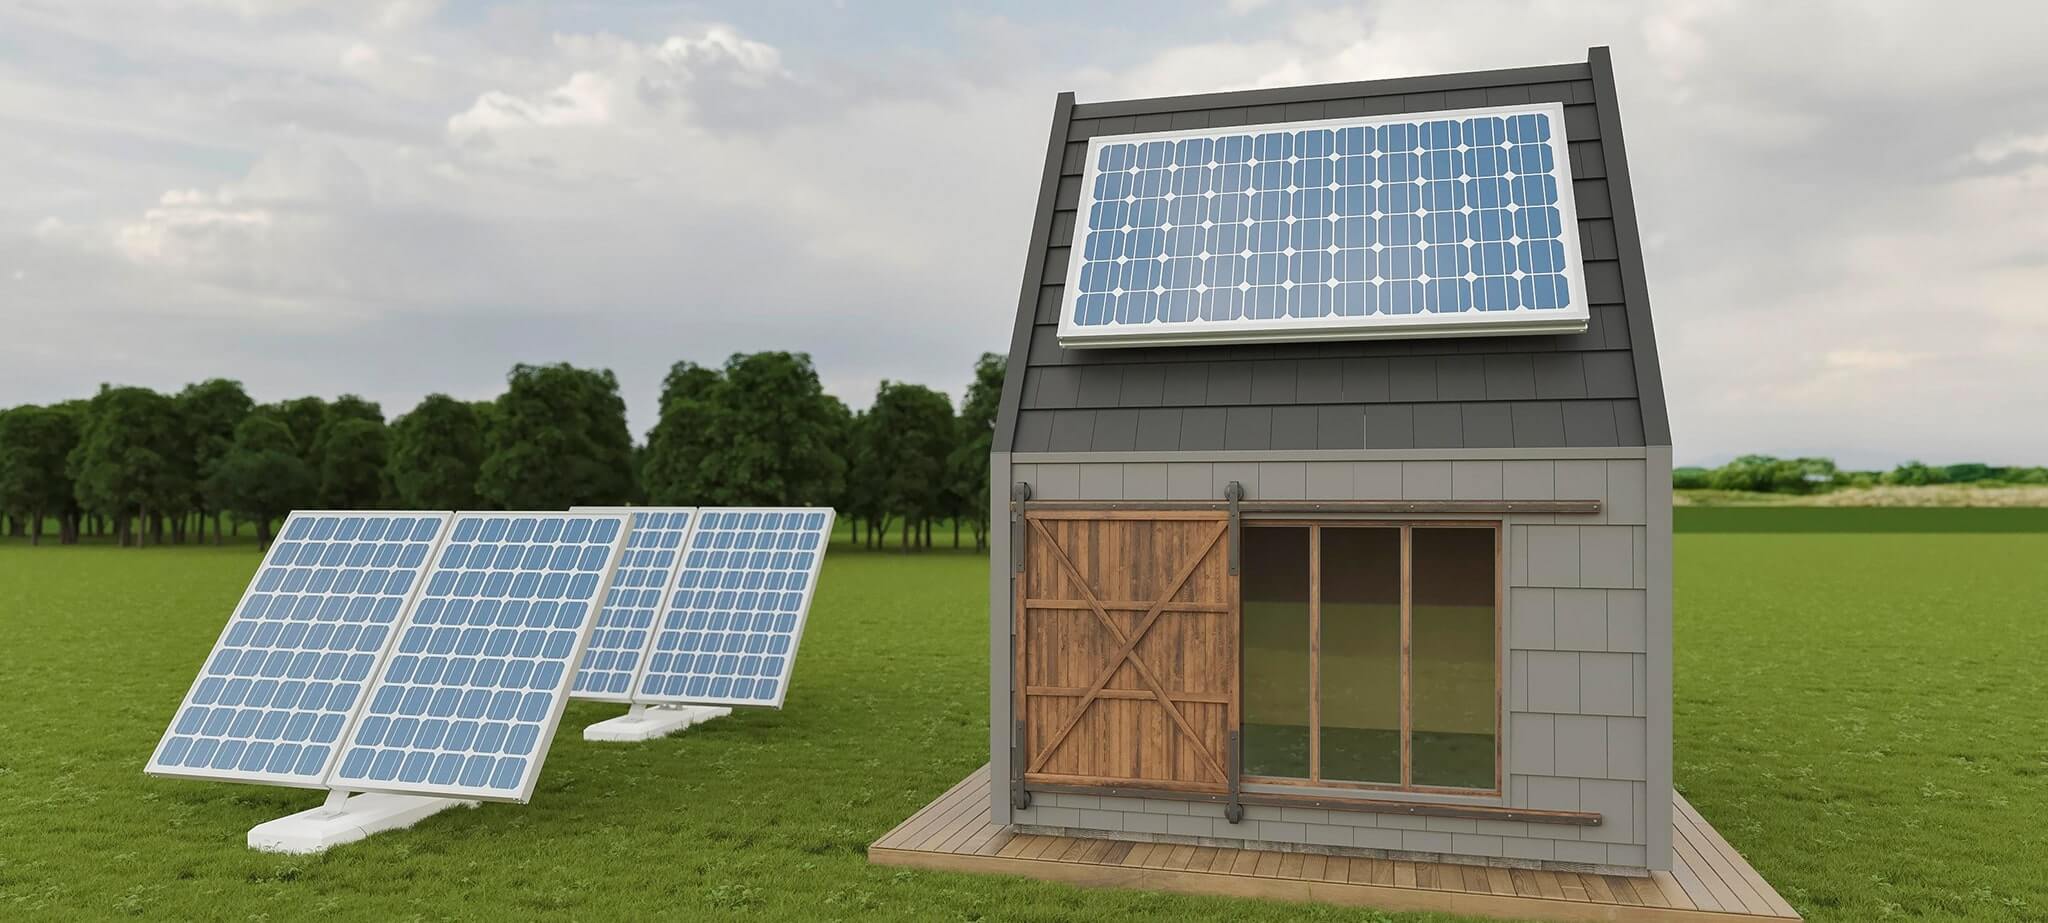 Are Solar Panels Practical for Tiny Houses?